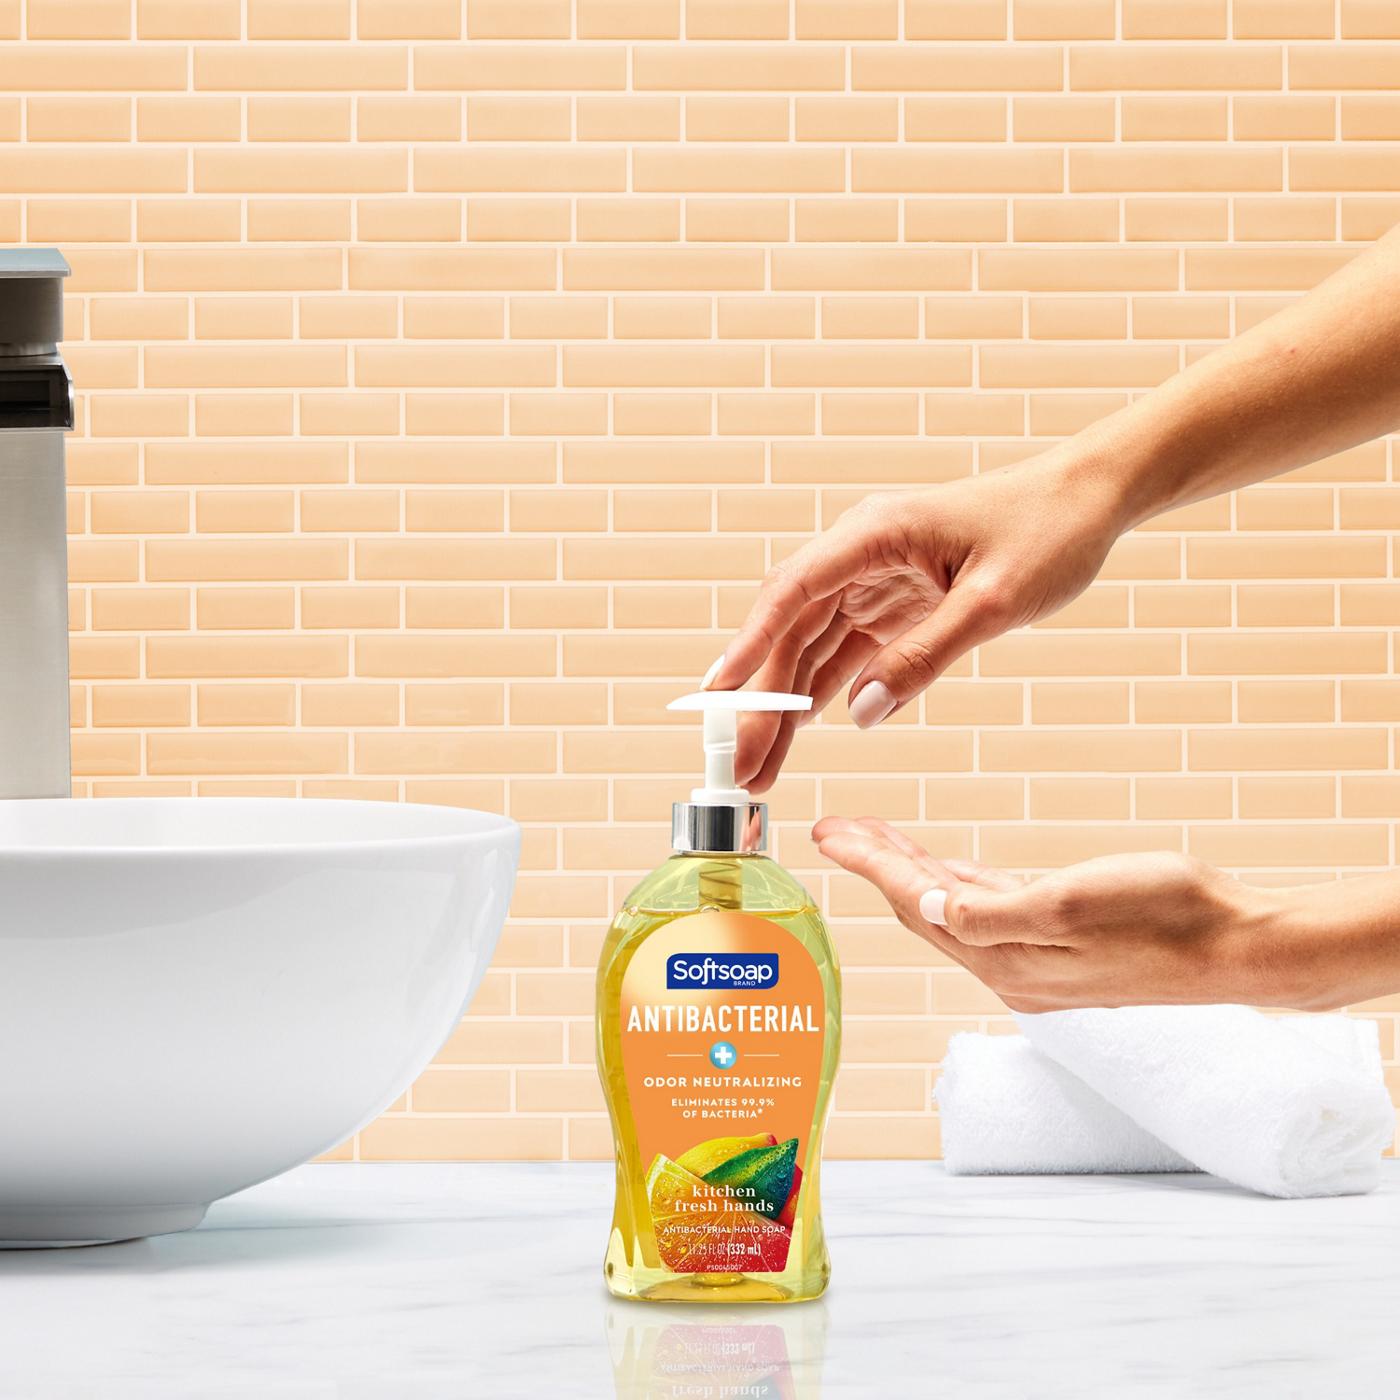 Softsoap Kitchen Fresh Hands Antibacterial Citrus Hand Soap; image 9 of 9